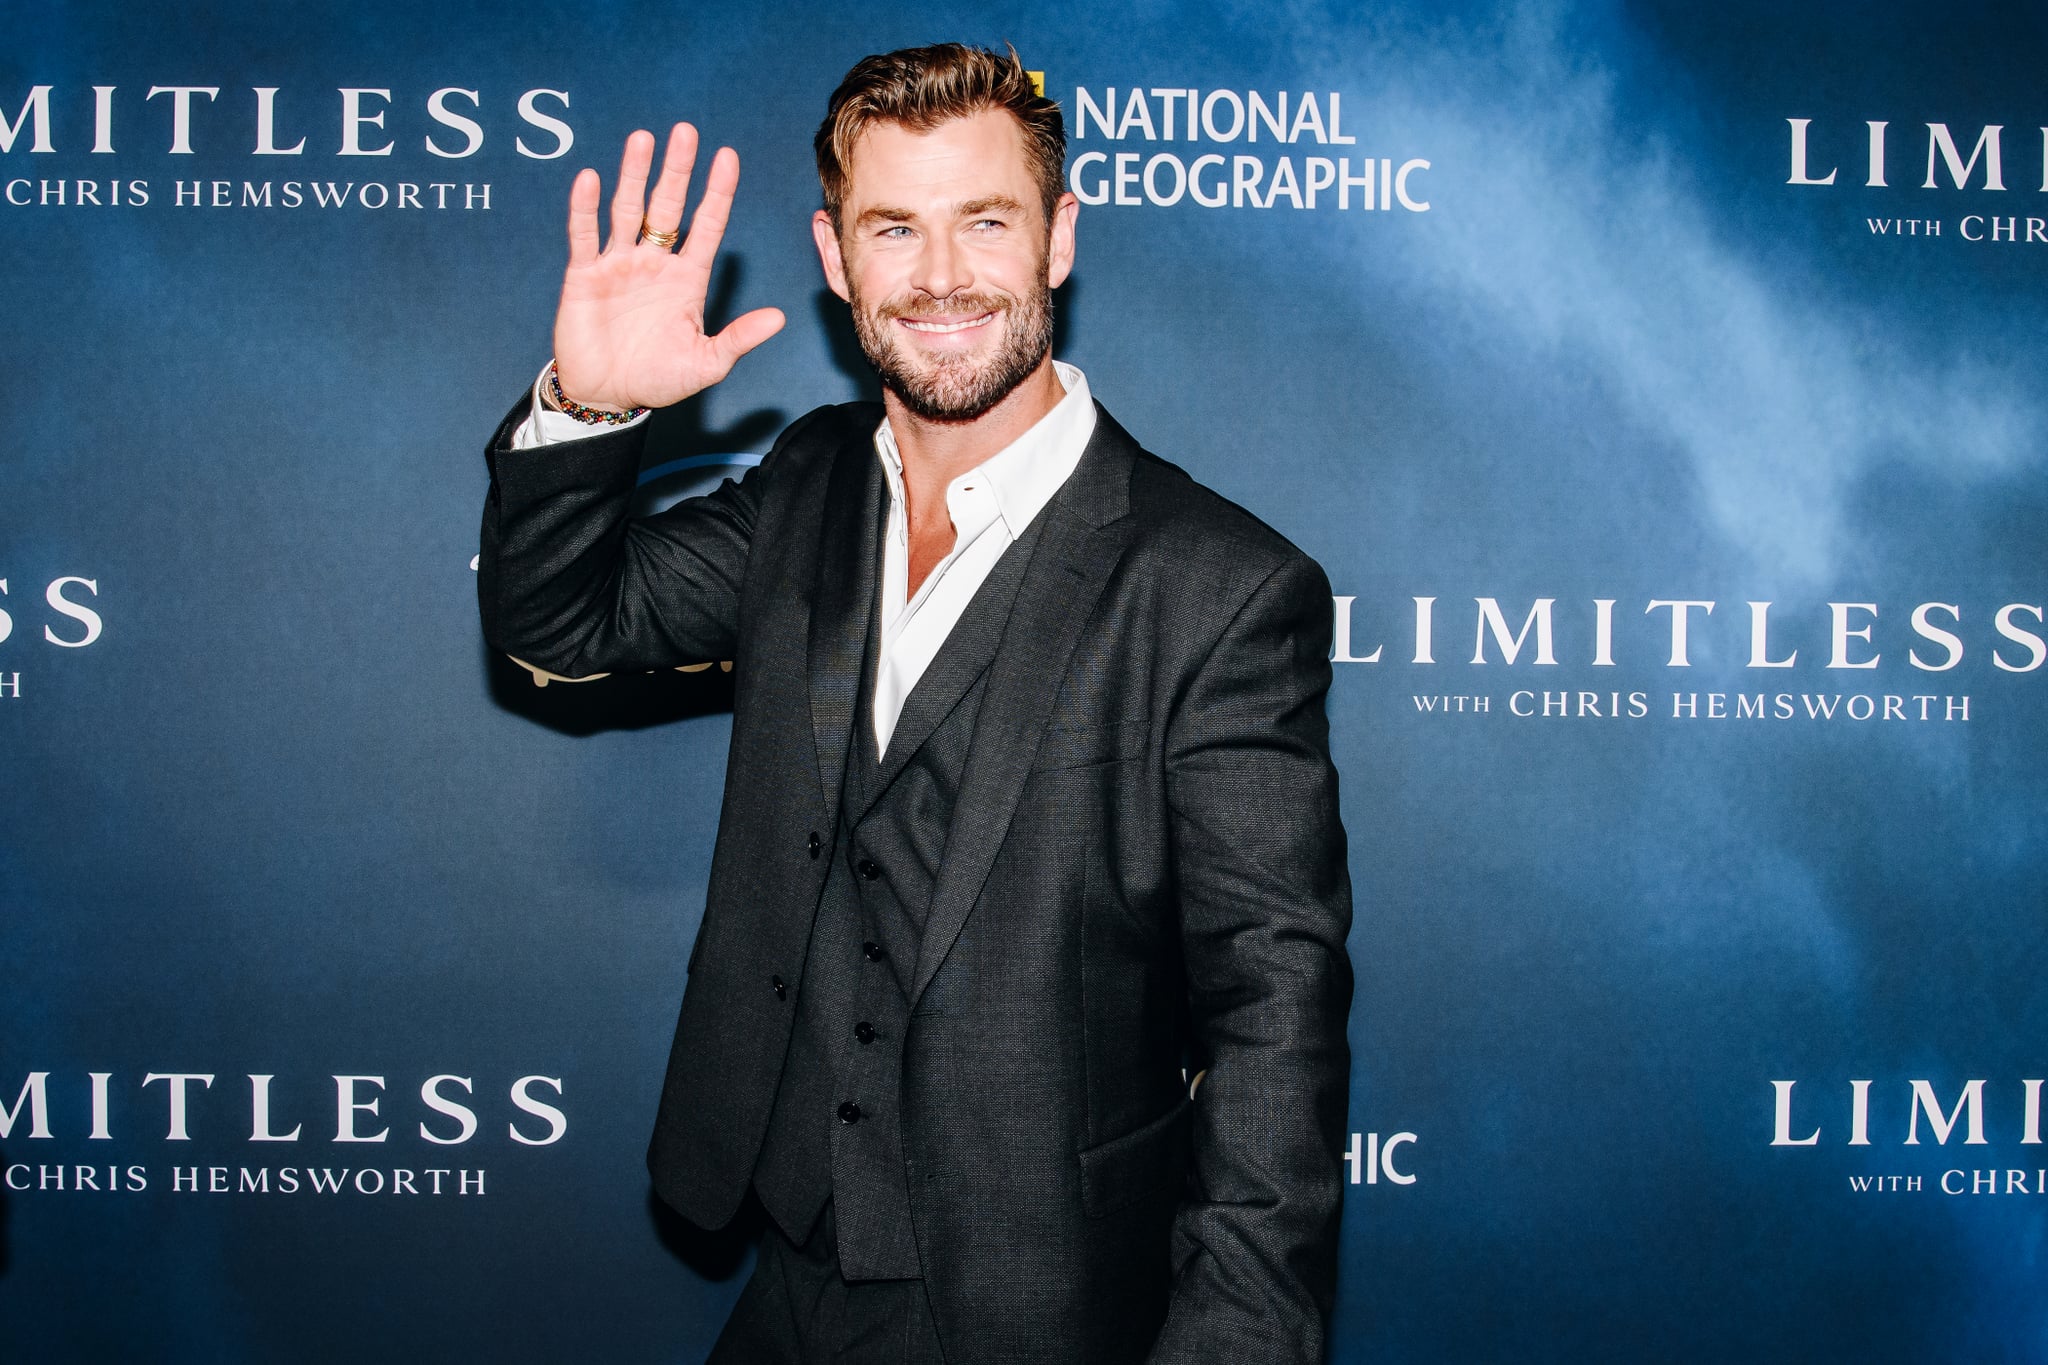 Chris Hemsworth at the red carpet event for National Geographic's documentary series, 